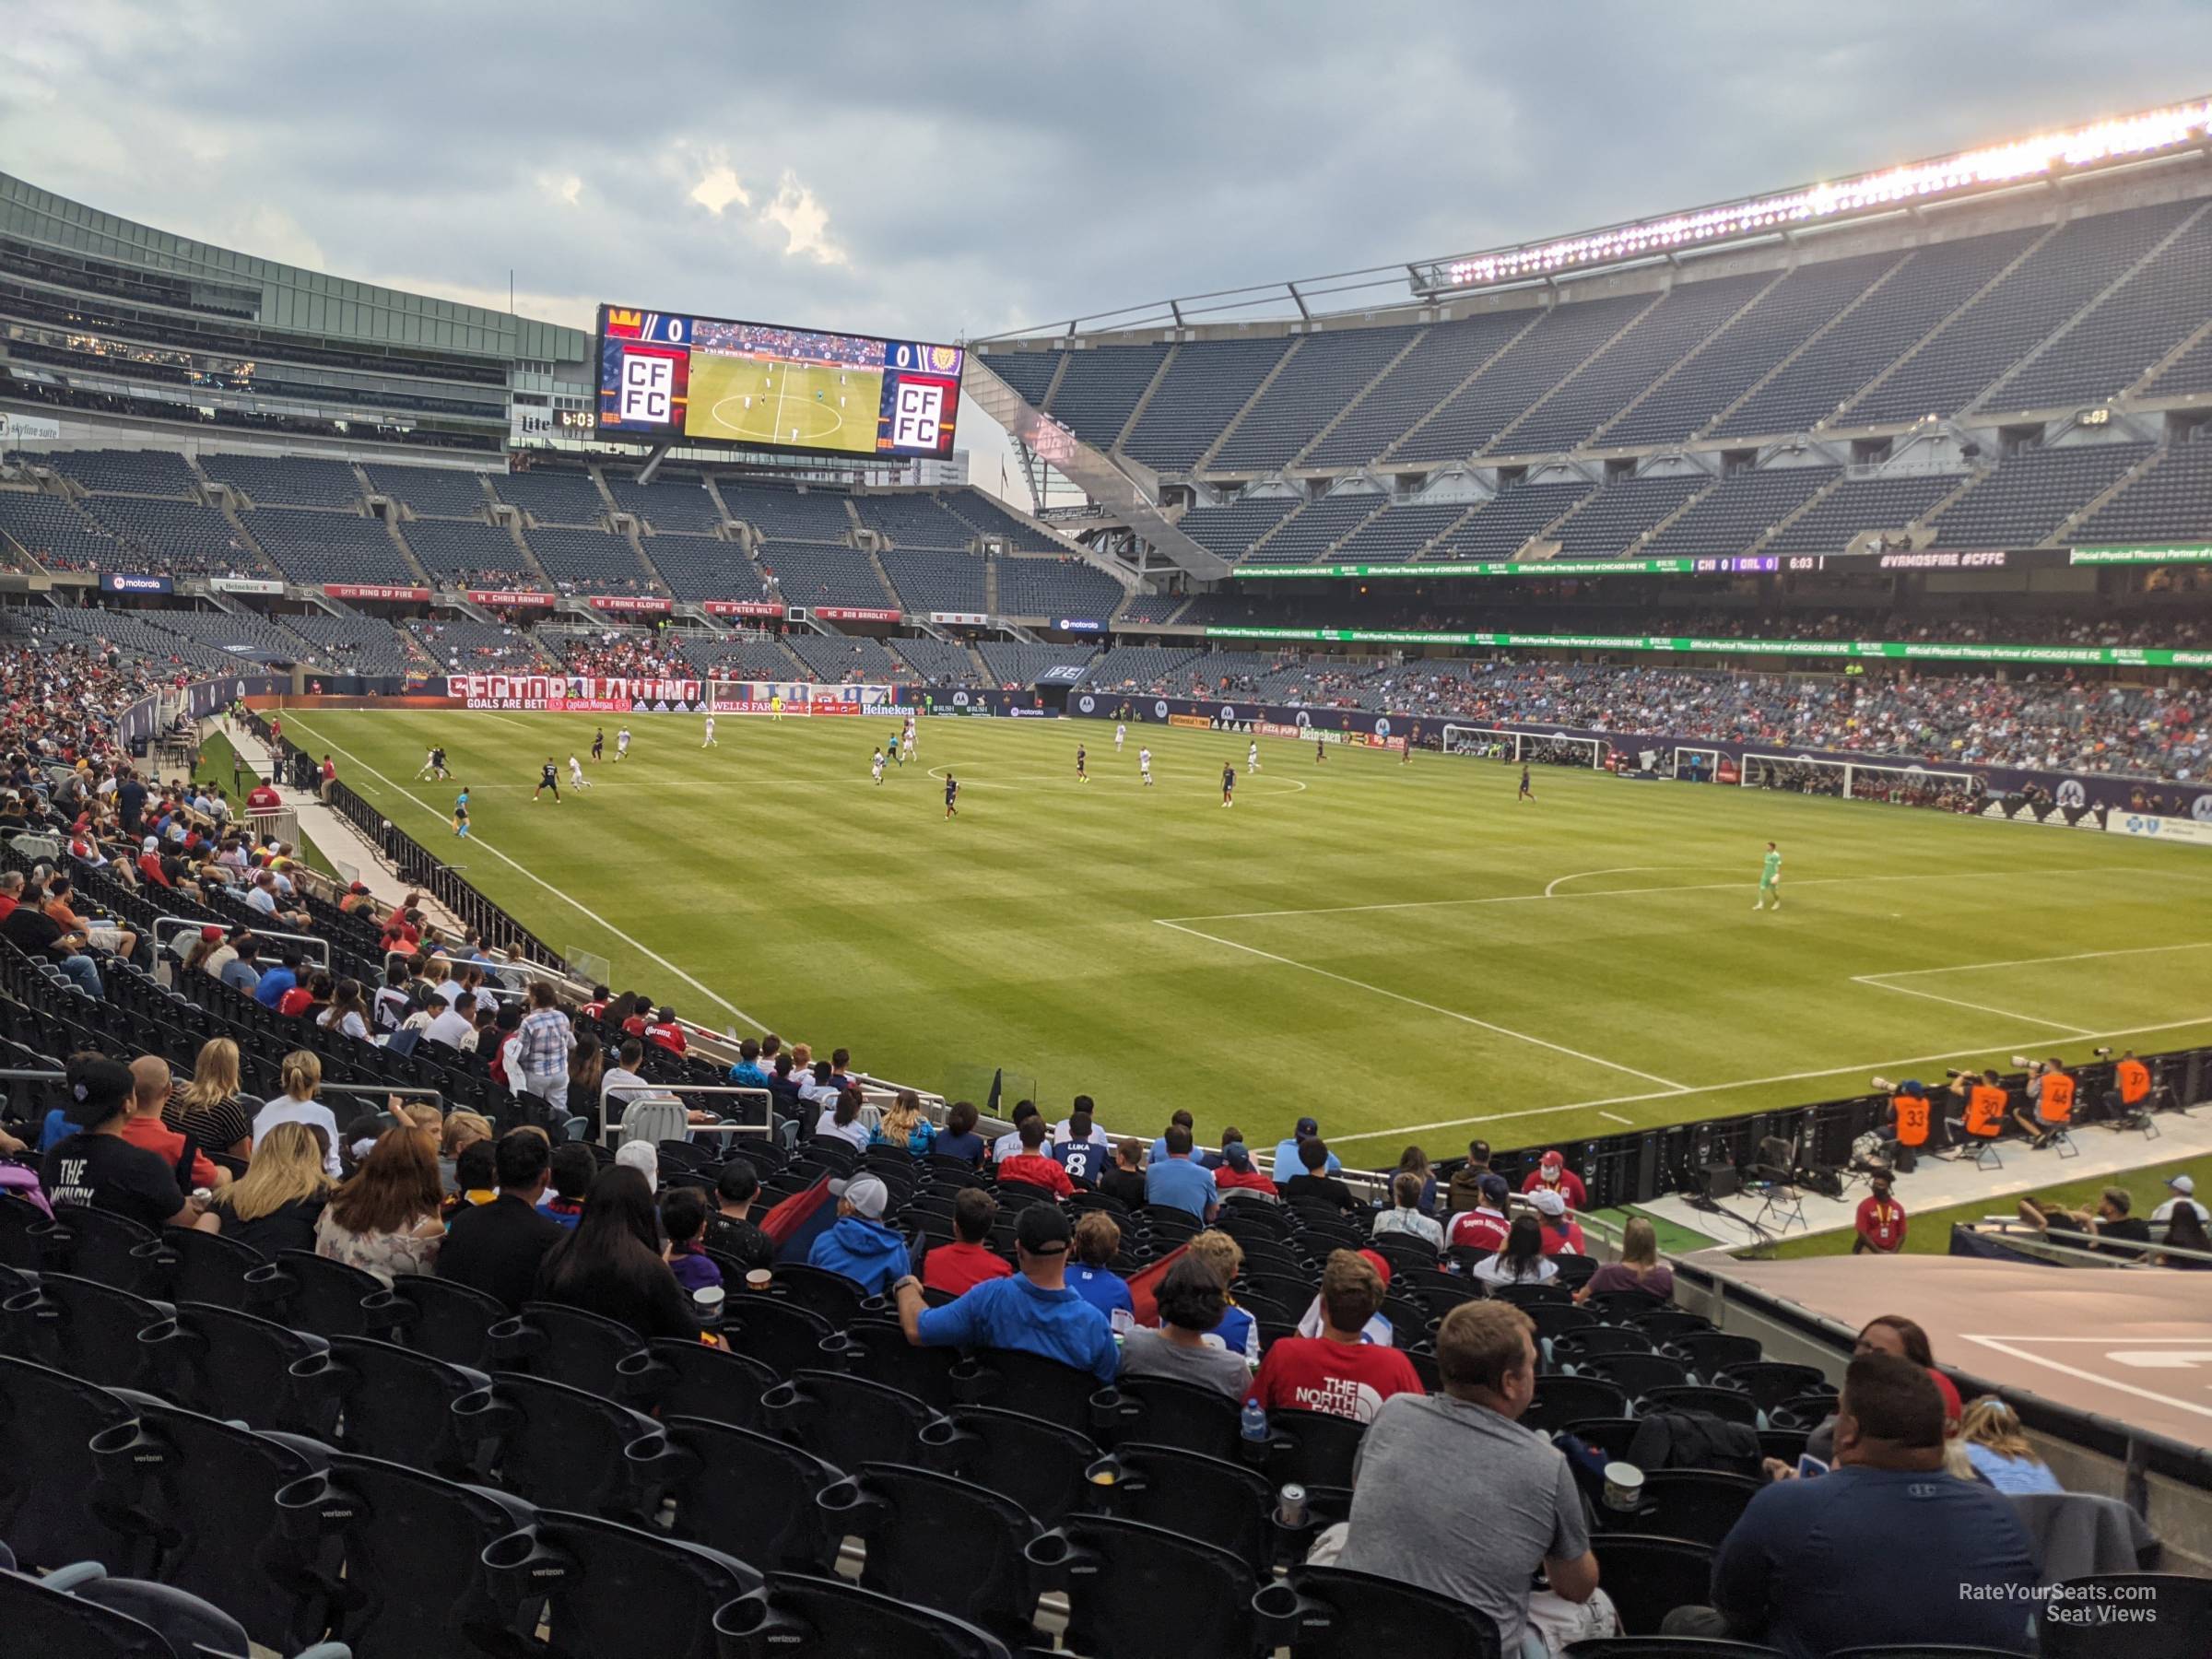 section 101, row 18 seat view  for soccer - soldier field